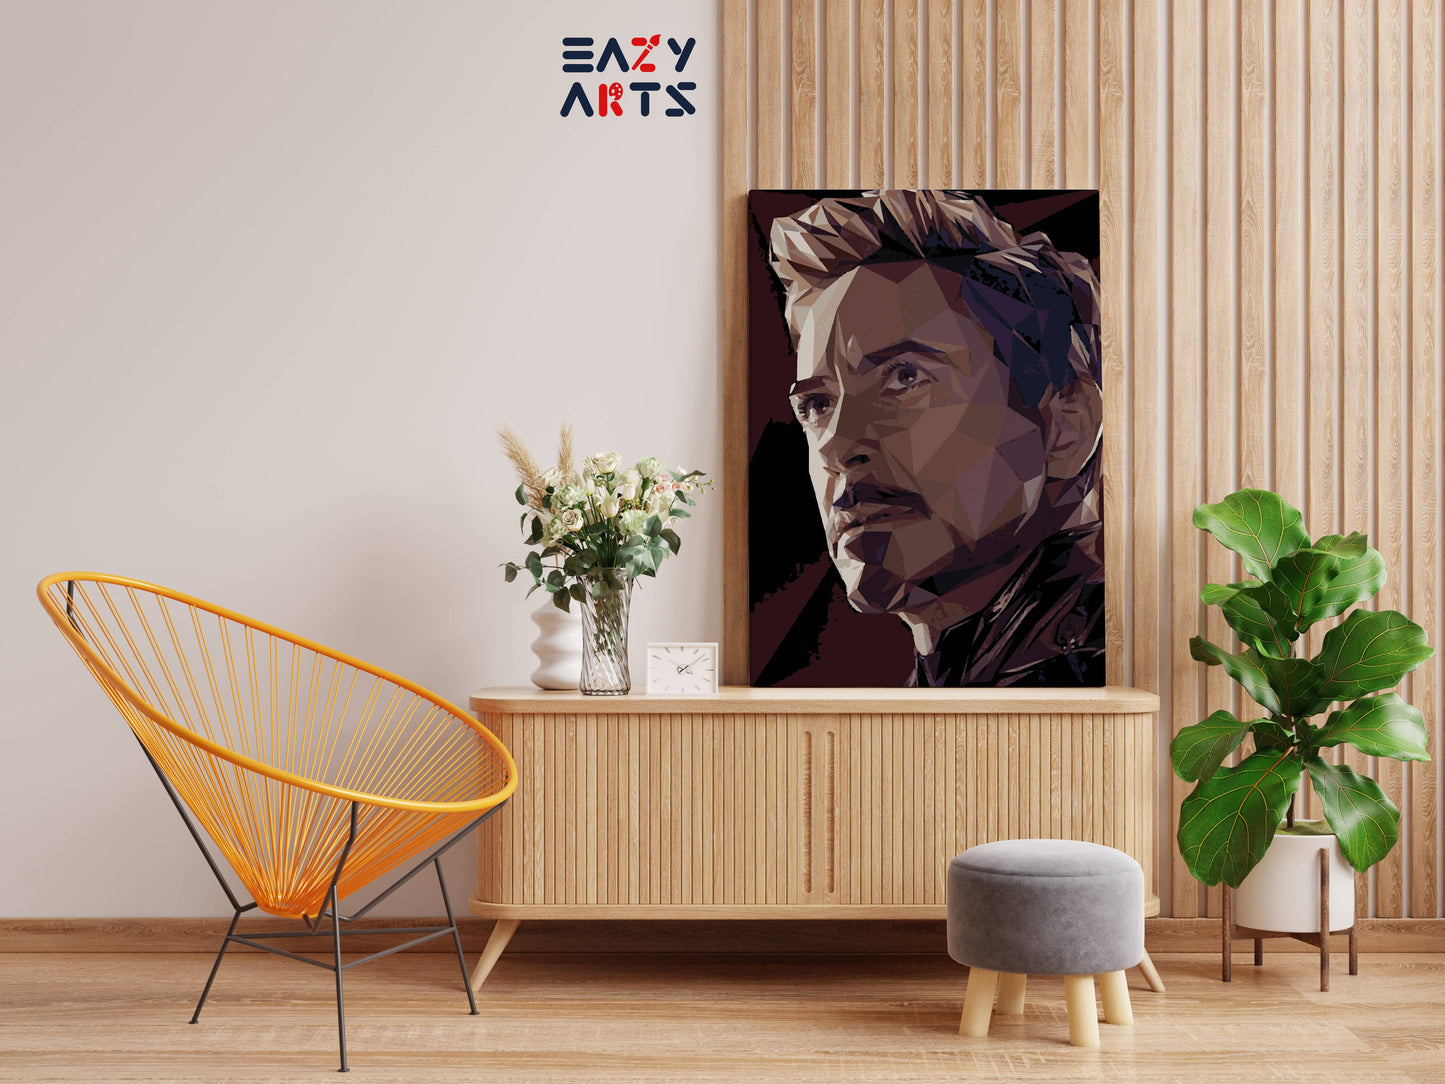 Tony Stark paint by numbers kit